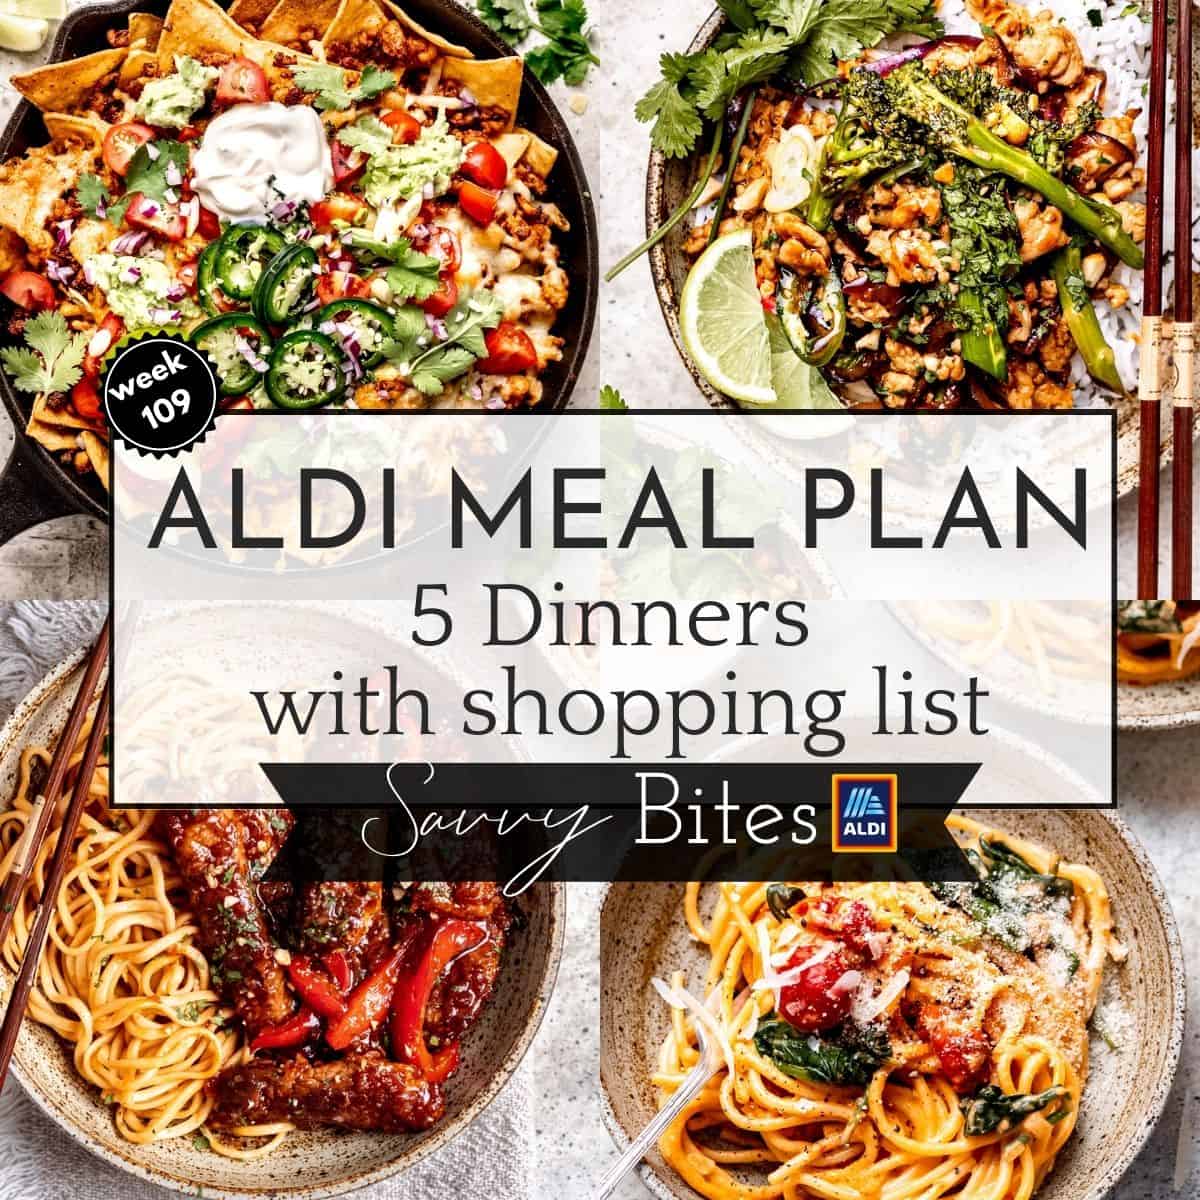 Aldi family budget meal plan photo collage.